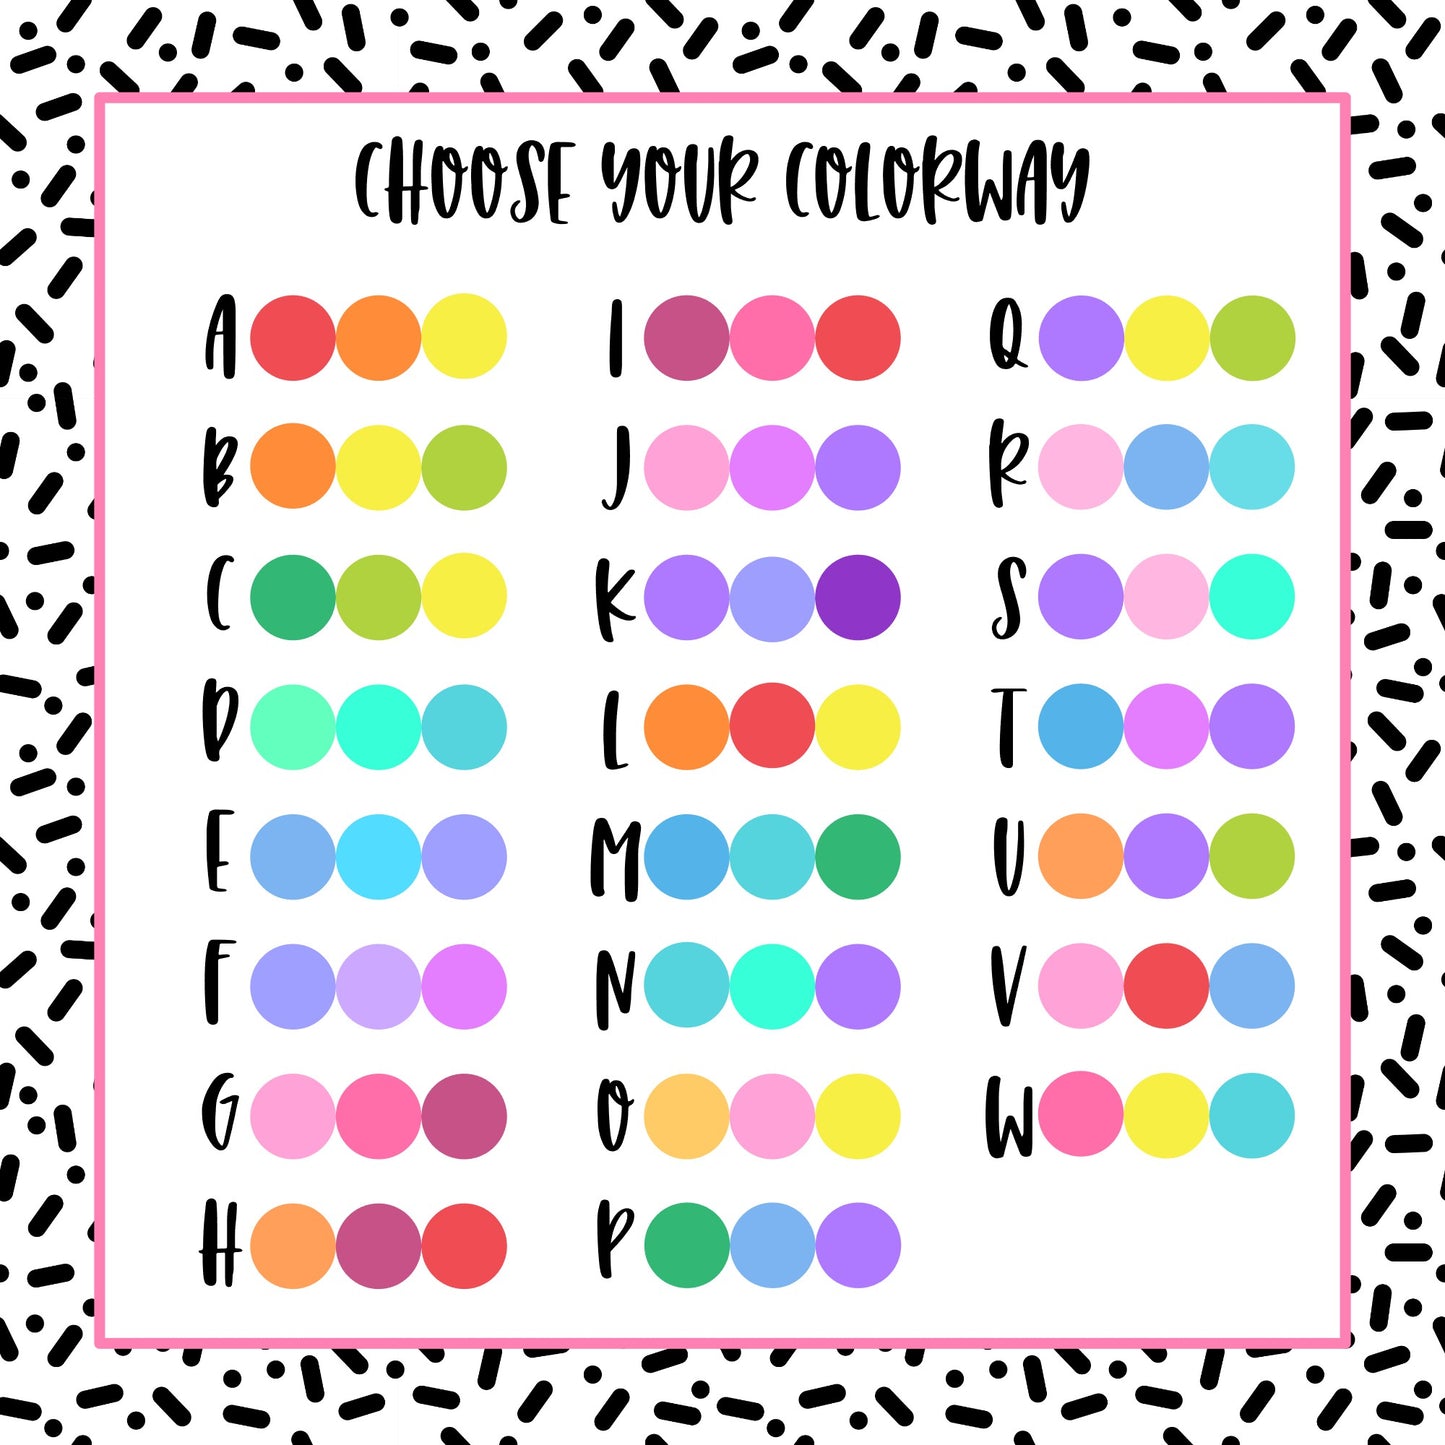 Bright Third Boxes - 23 color options